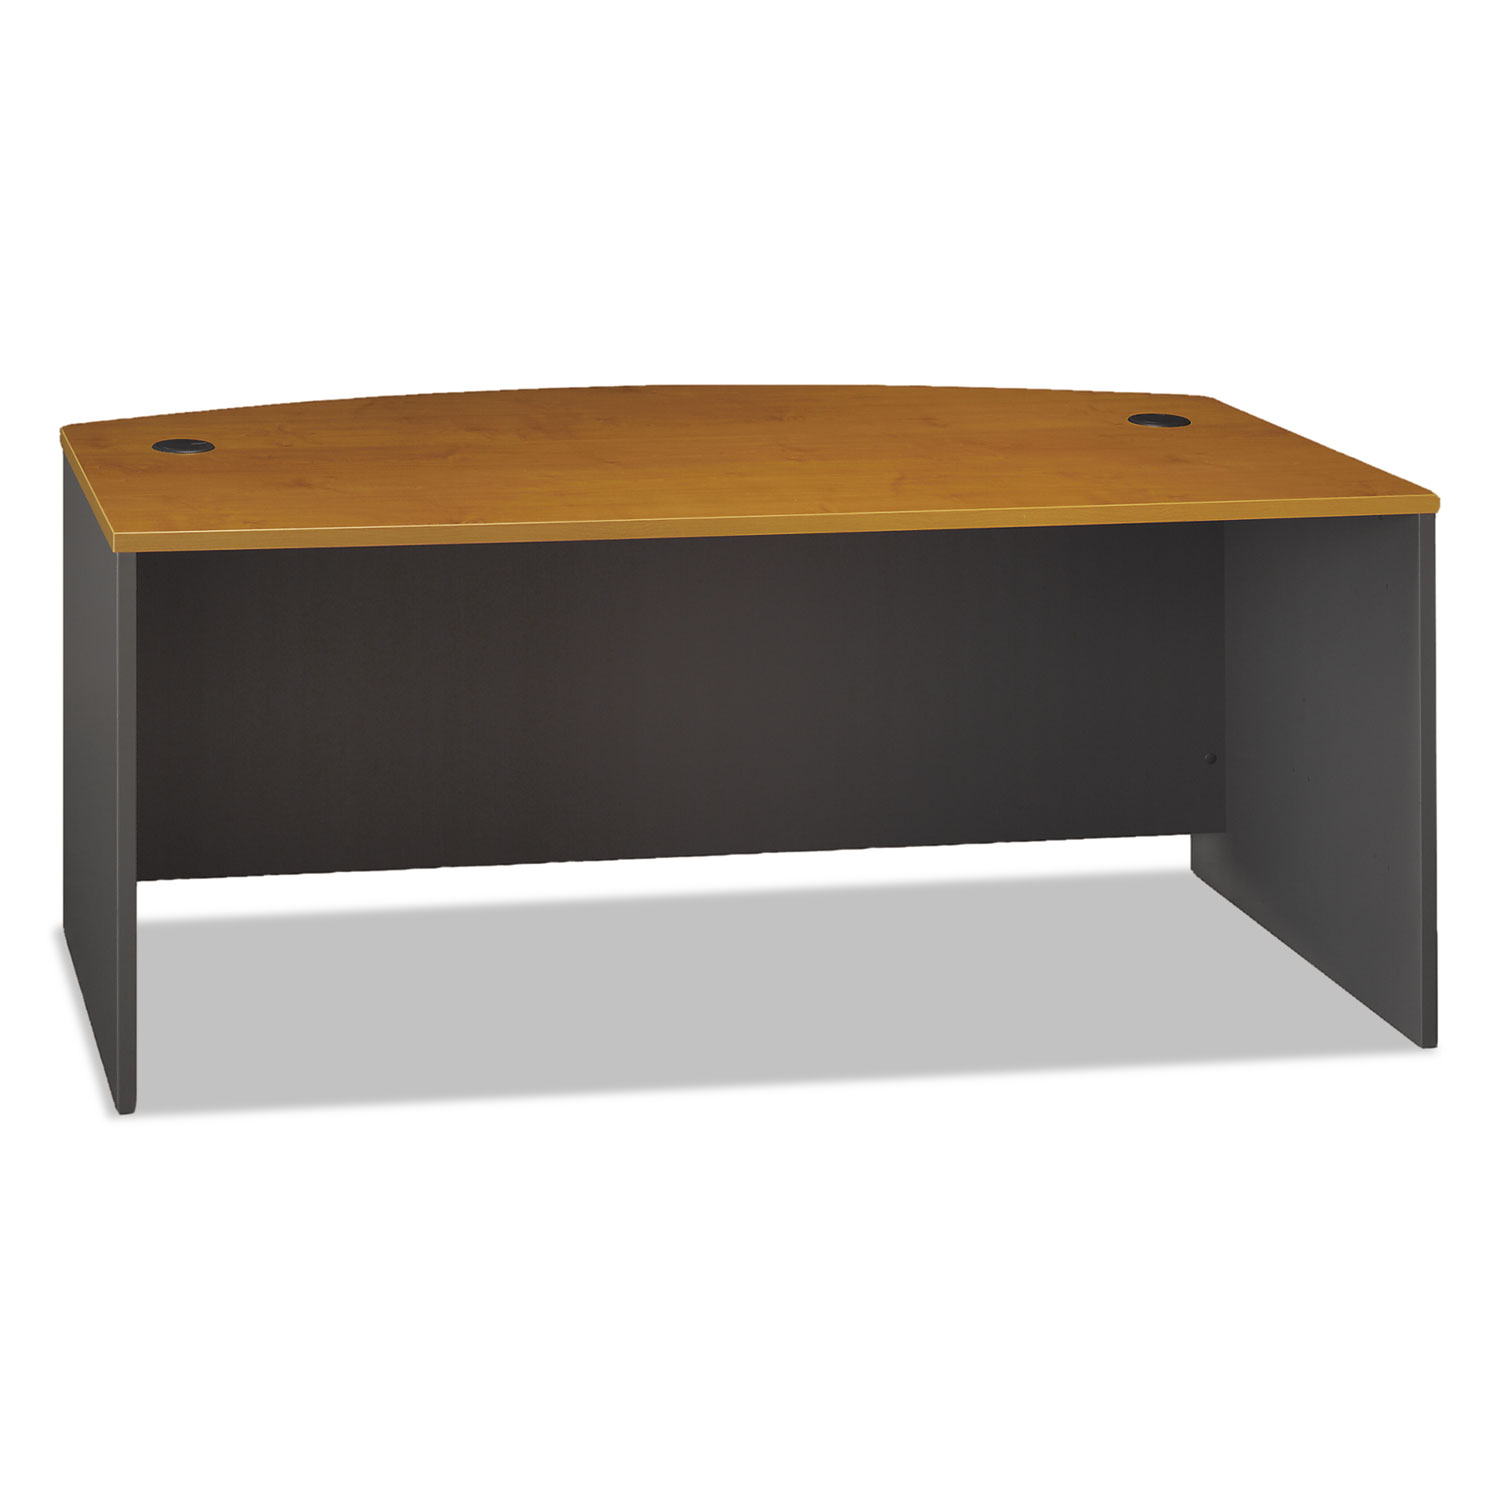  Bush WC72446 Series C Collection 72W Bow Front Desk Shell, 71.13w x 36.13d x 29.88h, Natural Cherry (BSHWC72446) 